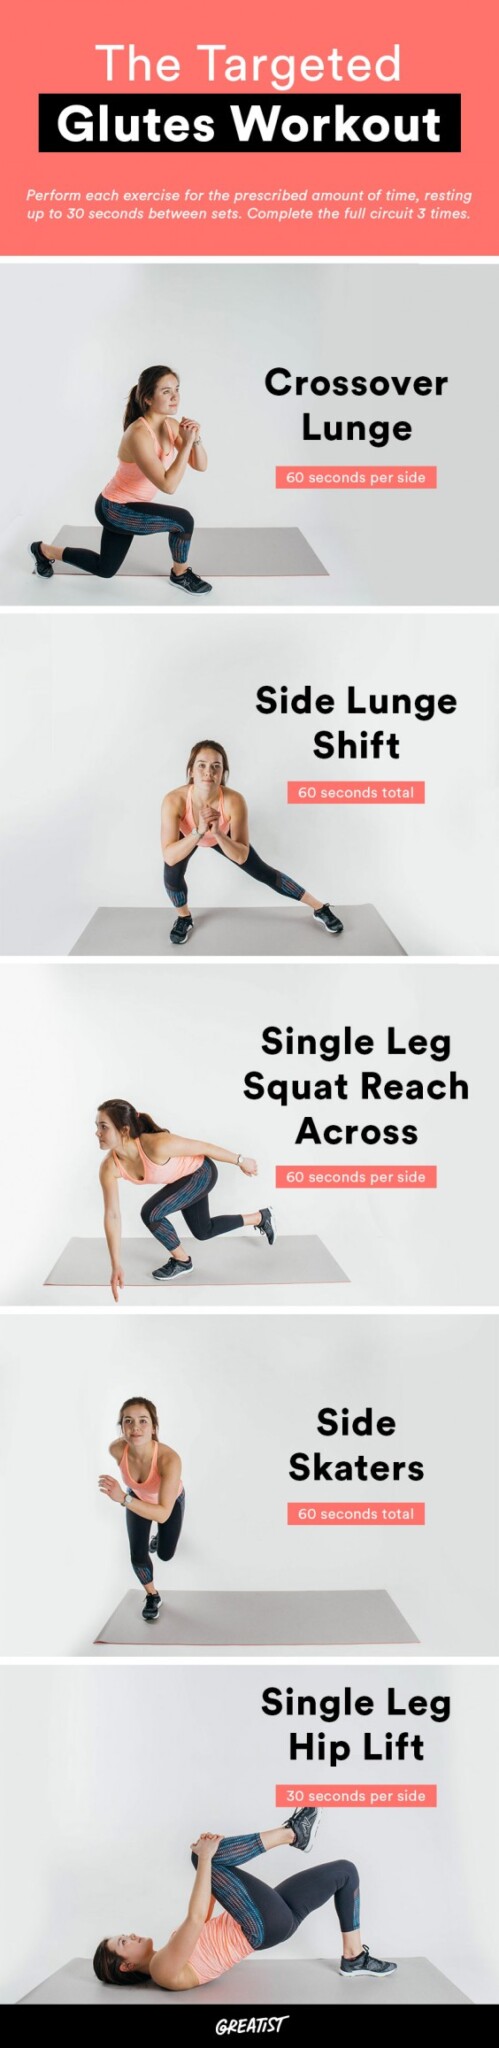 24 Killer Butt Workout Moves Using Just Your Bodyweight